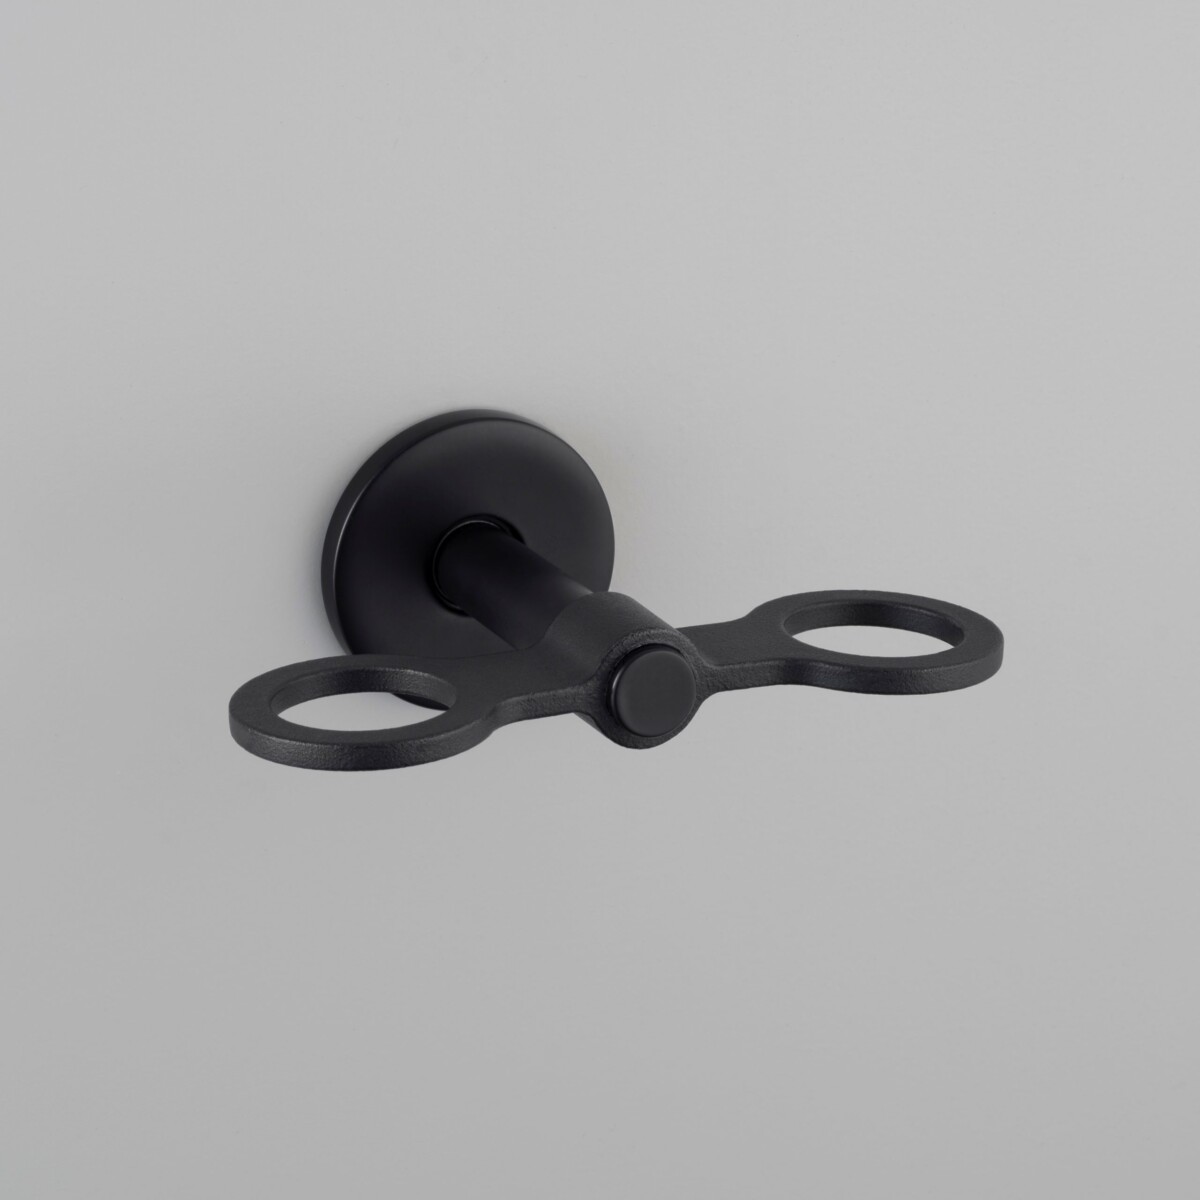 BP_Cast_Soap_Holder_Double_Black_A1_Web-scaled